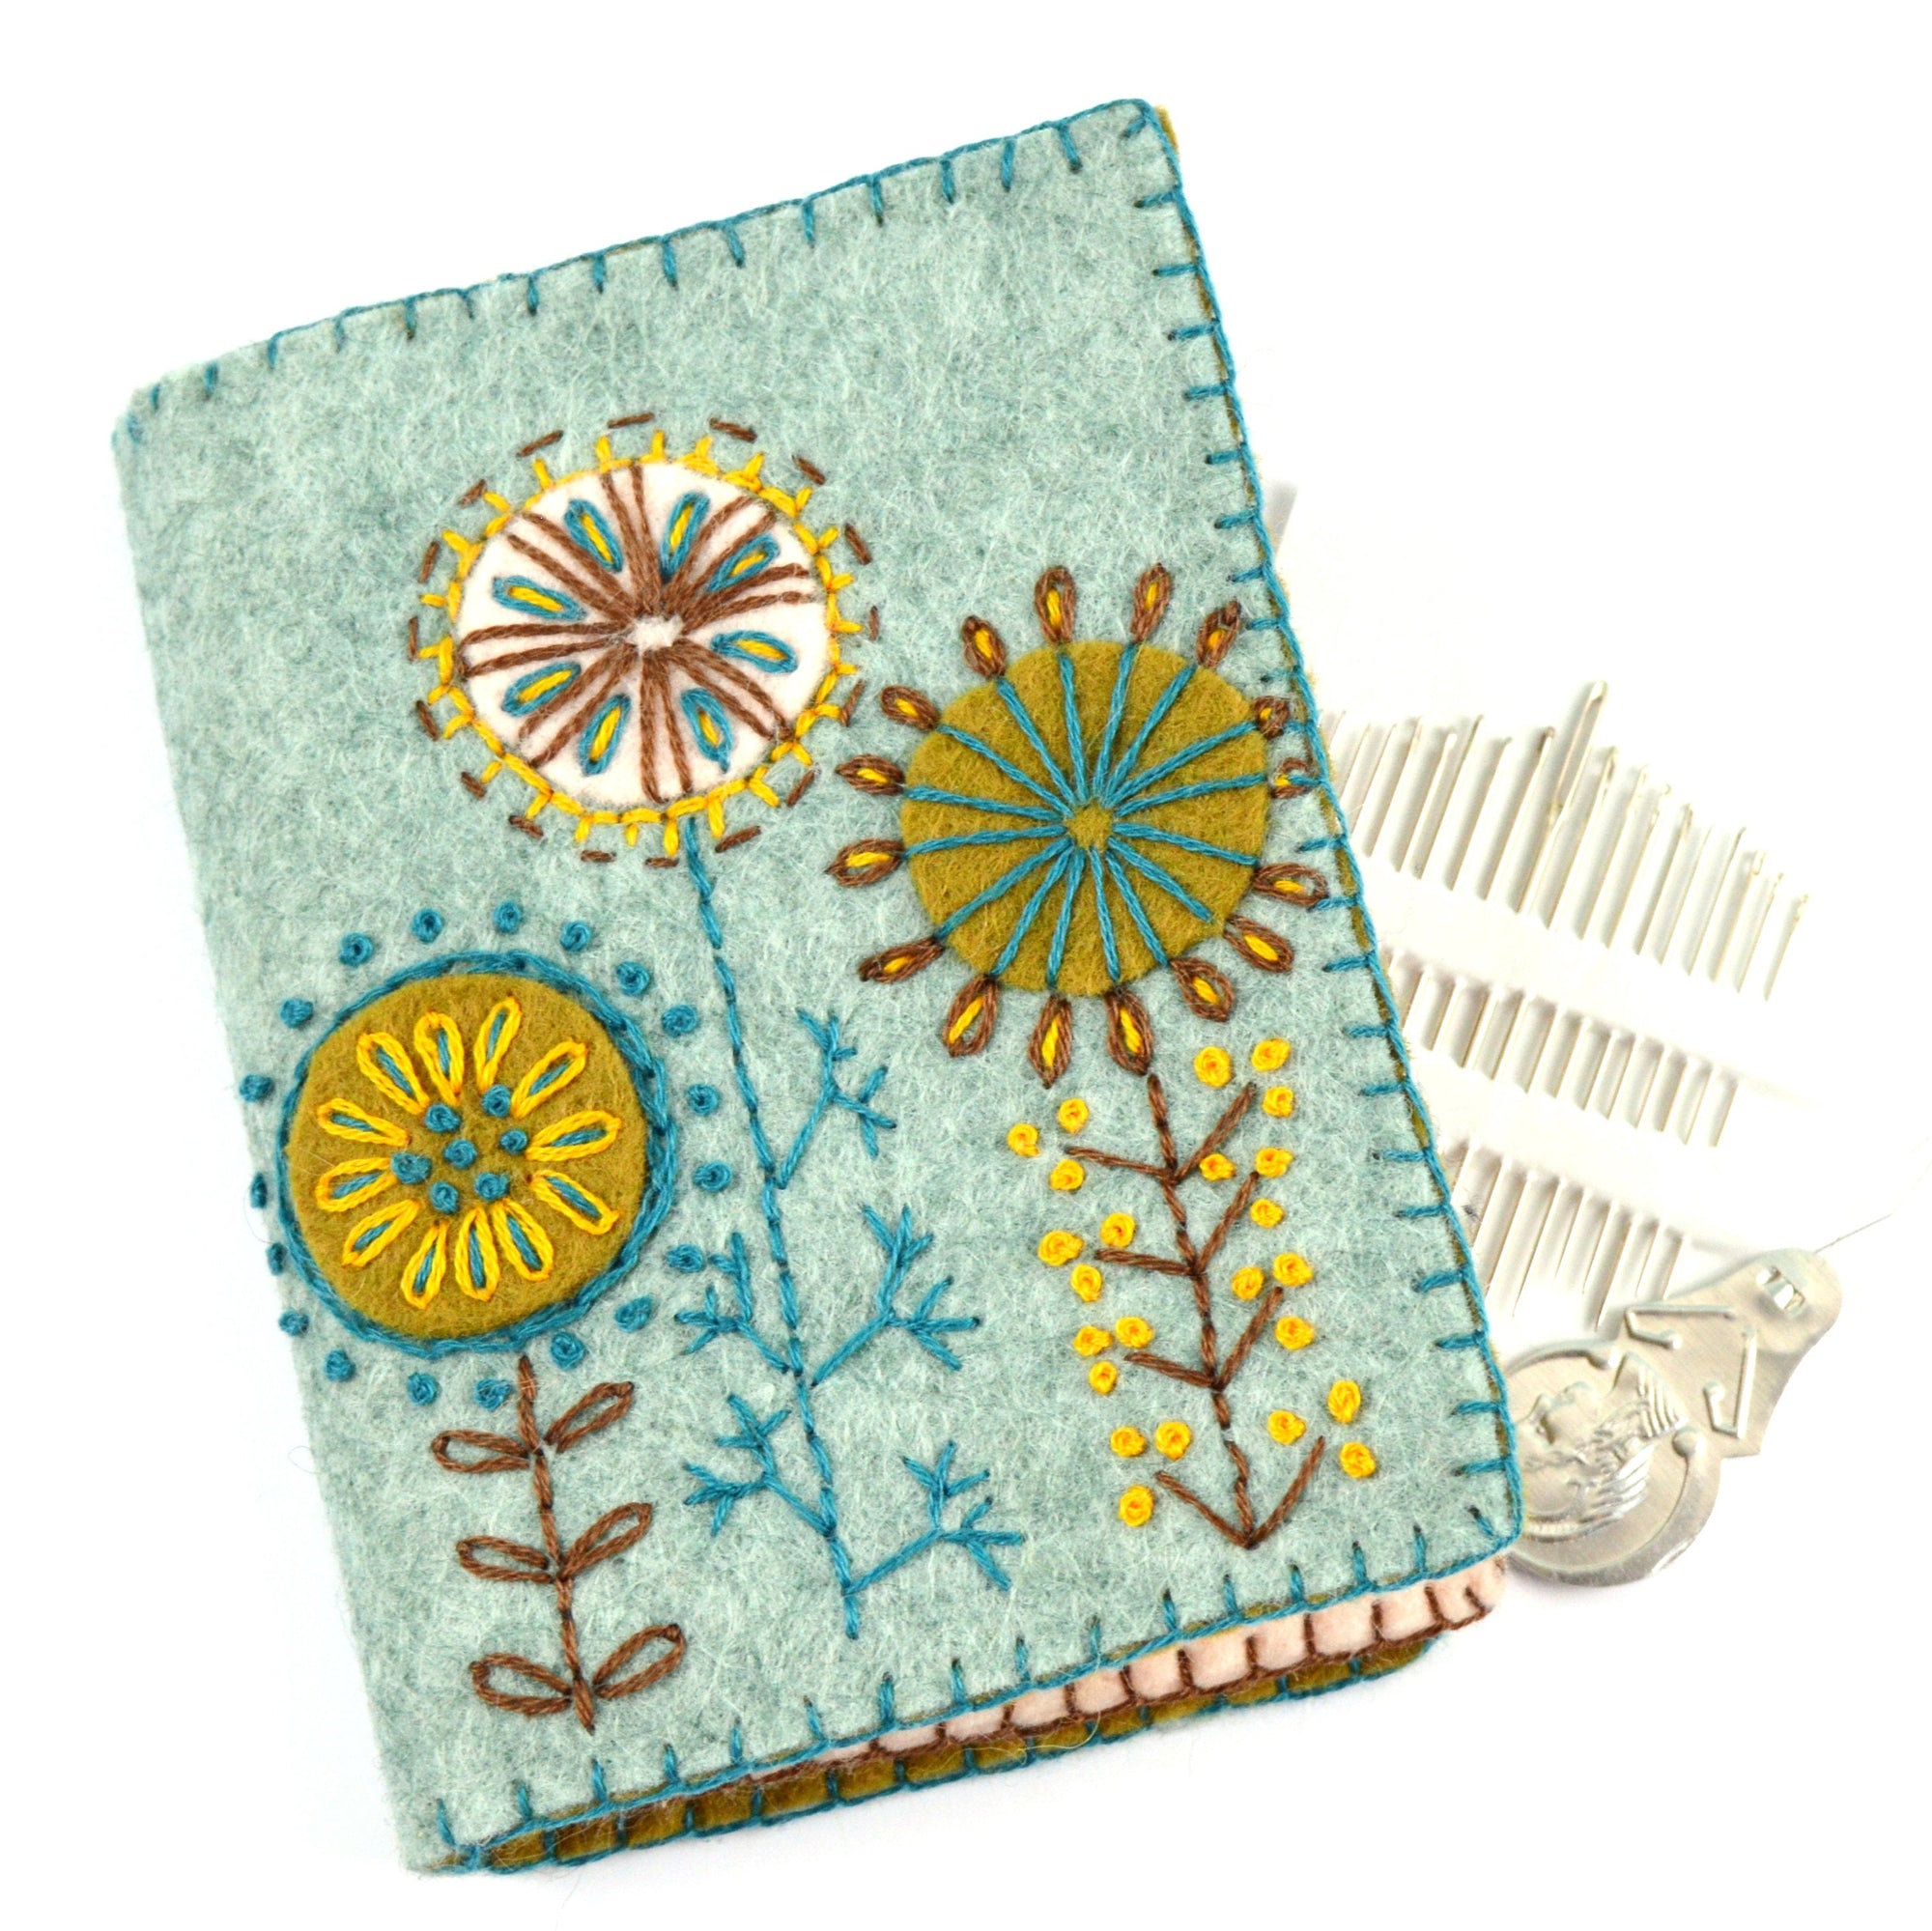 Corinne Lapierre Embroidery Sewing Kit - Needle Case with Flowers